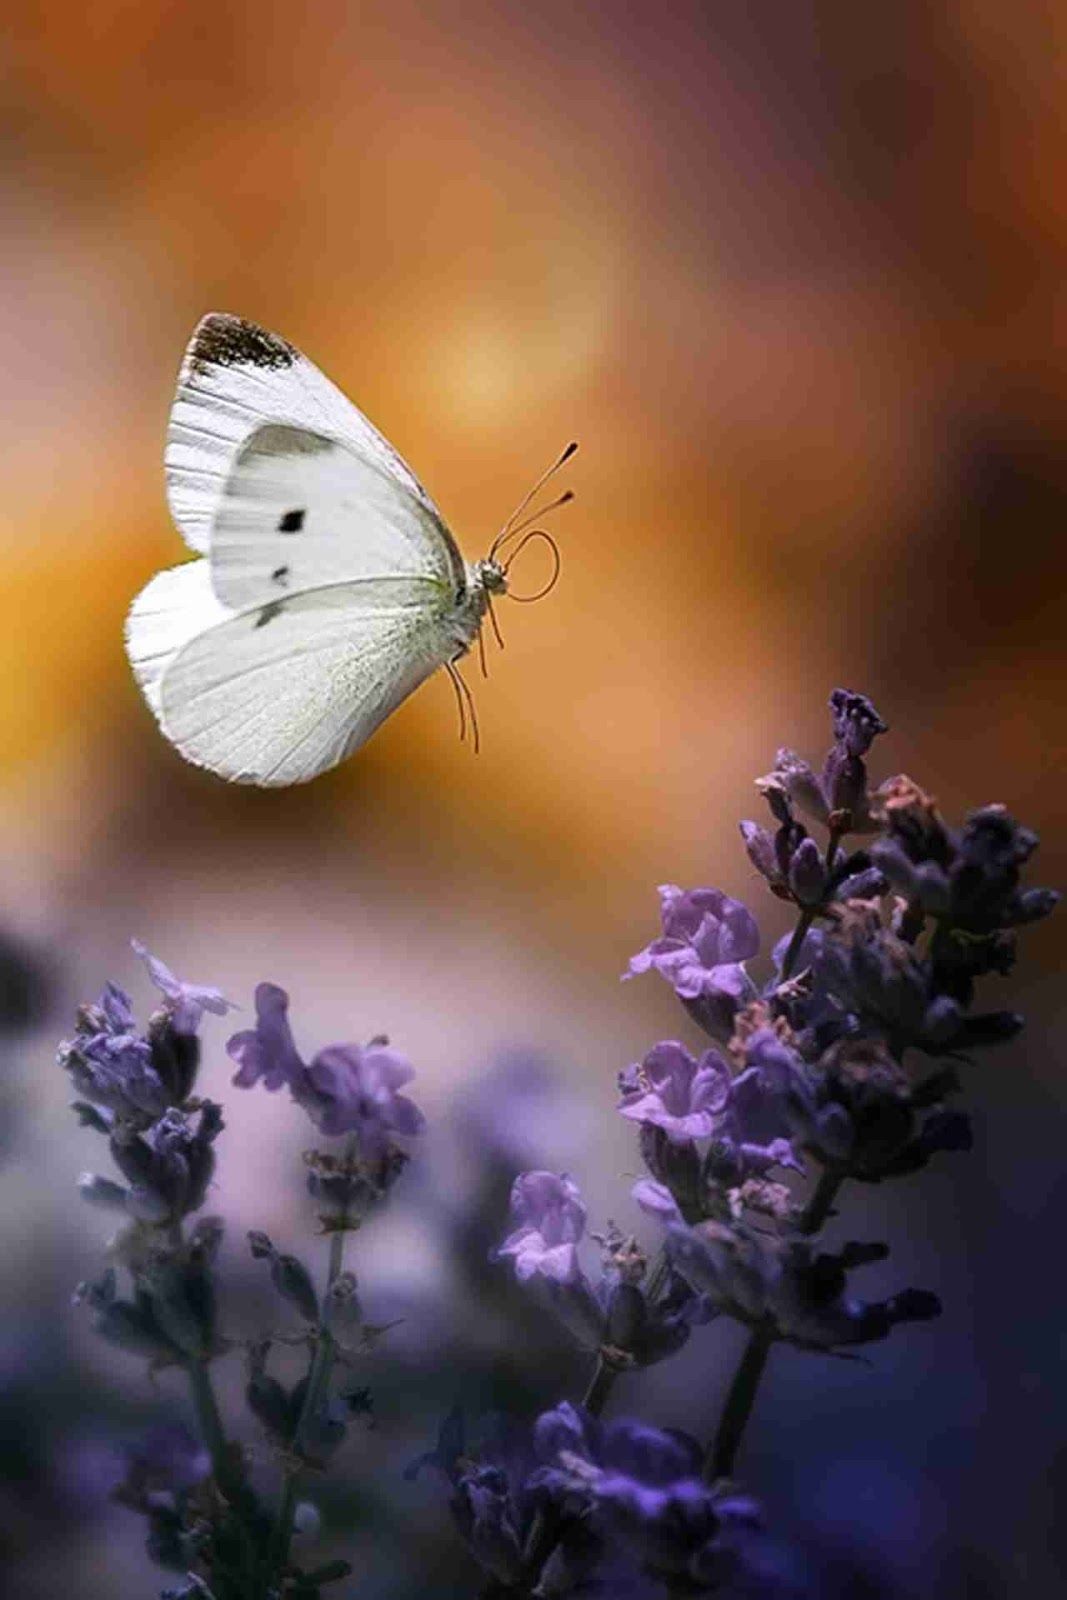 A white butterfly flying over purple flowers - Macro